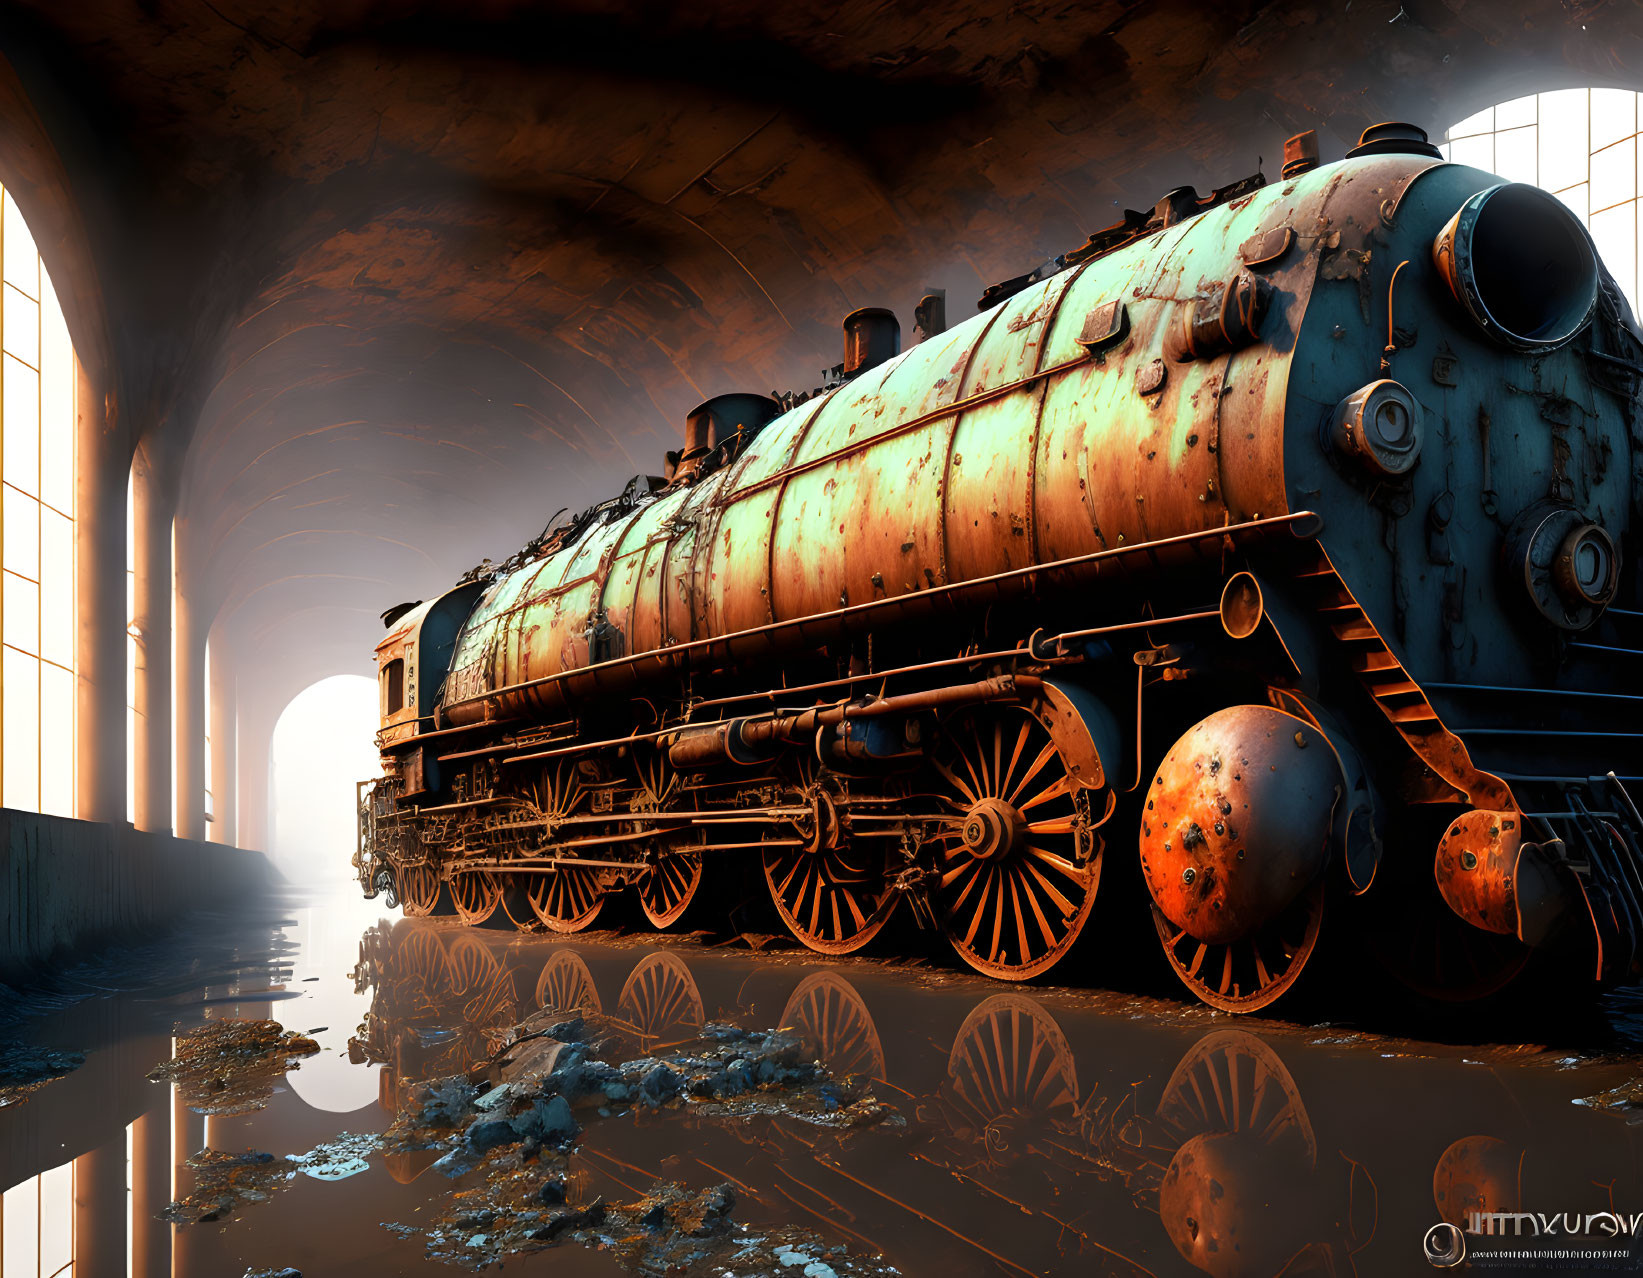 Rusted steam locomotive in abandoned station with sunlight and puddles